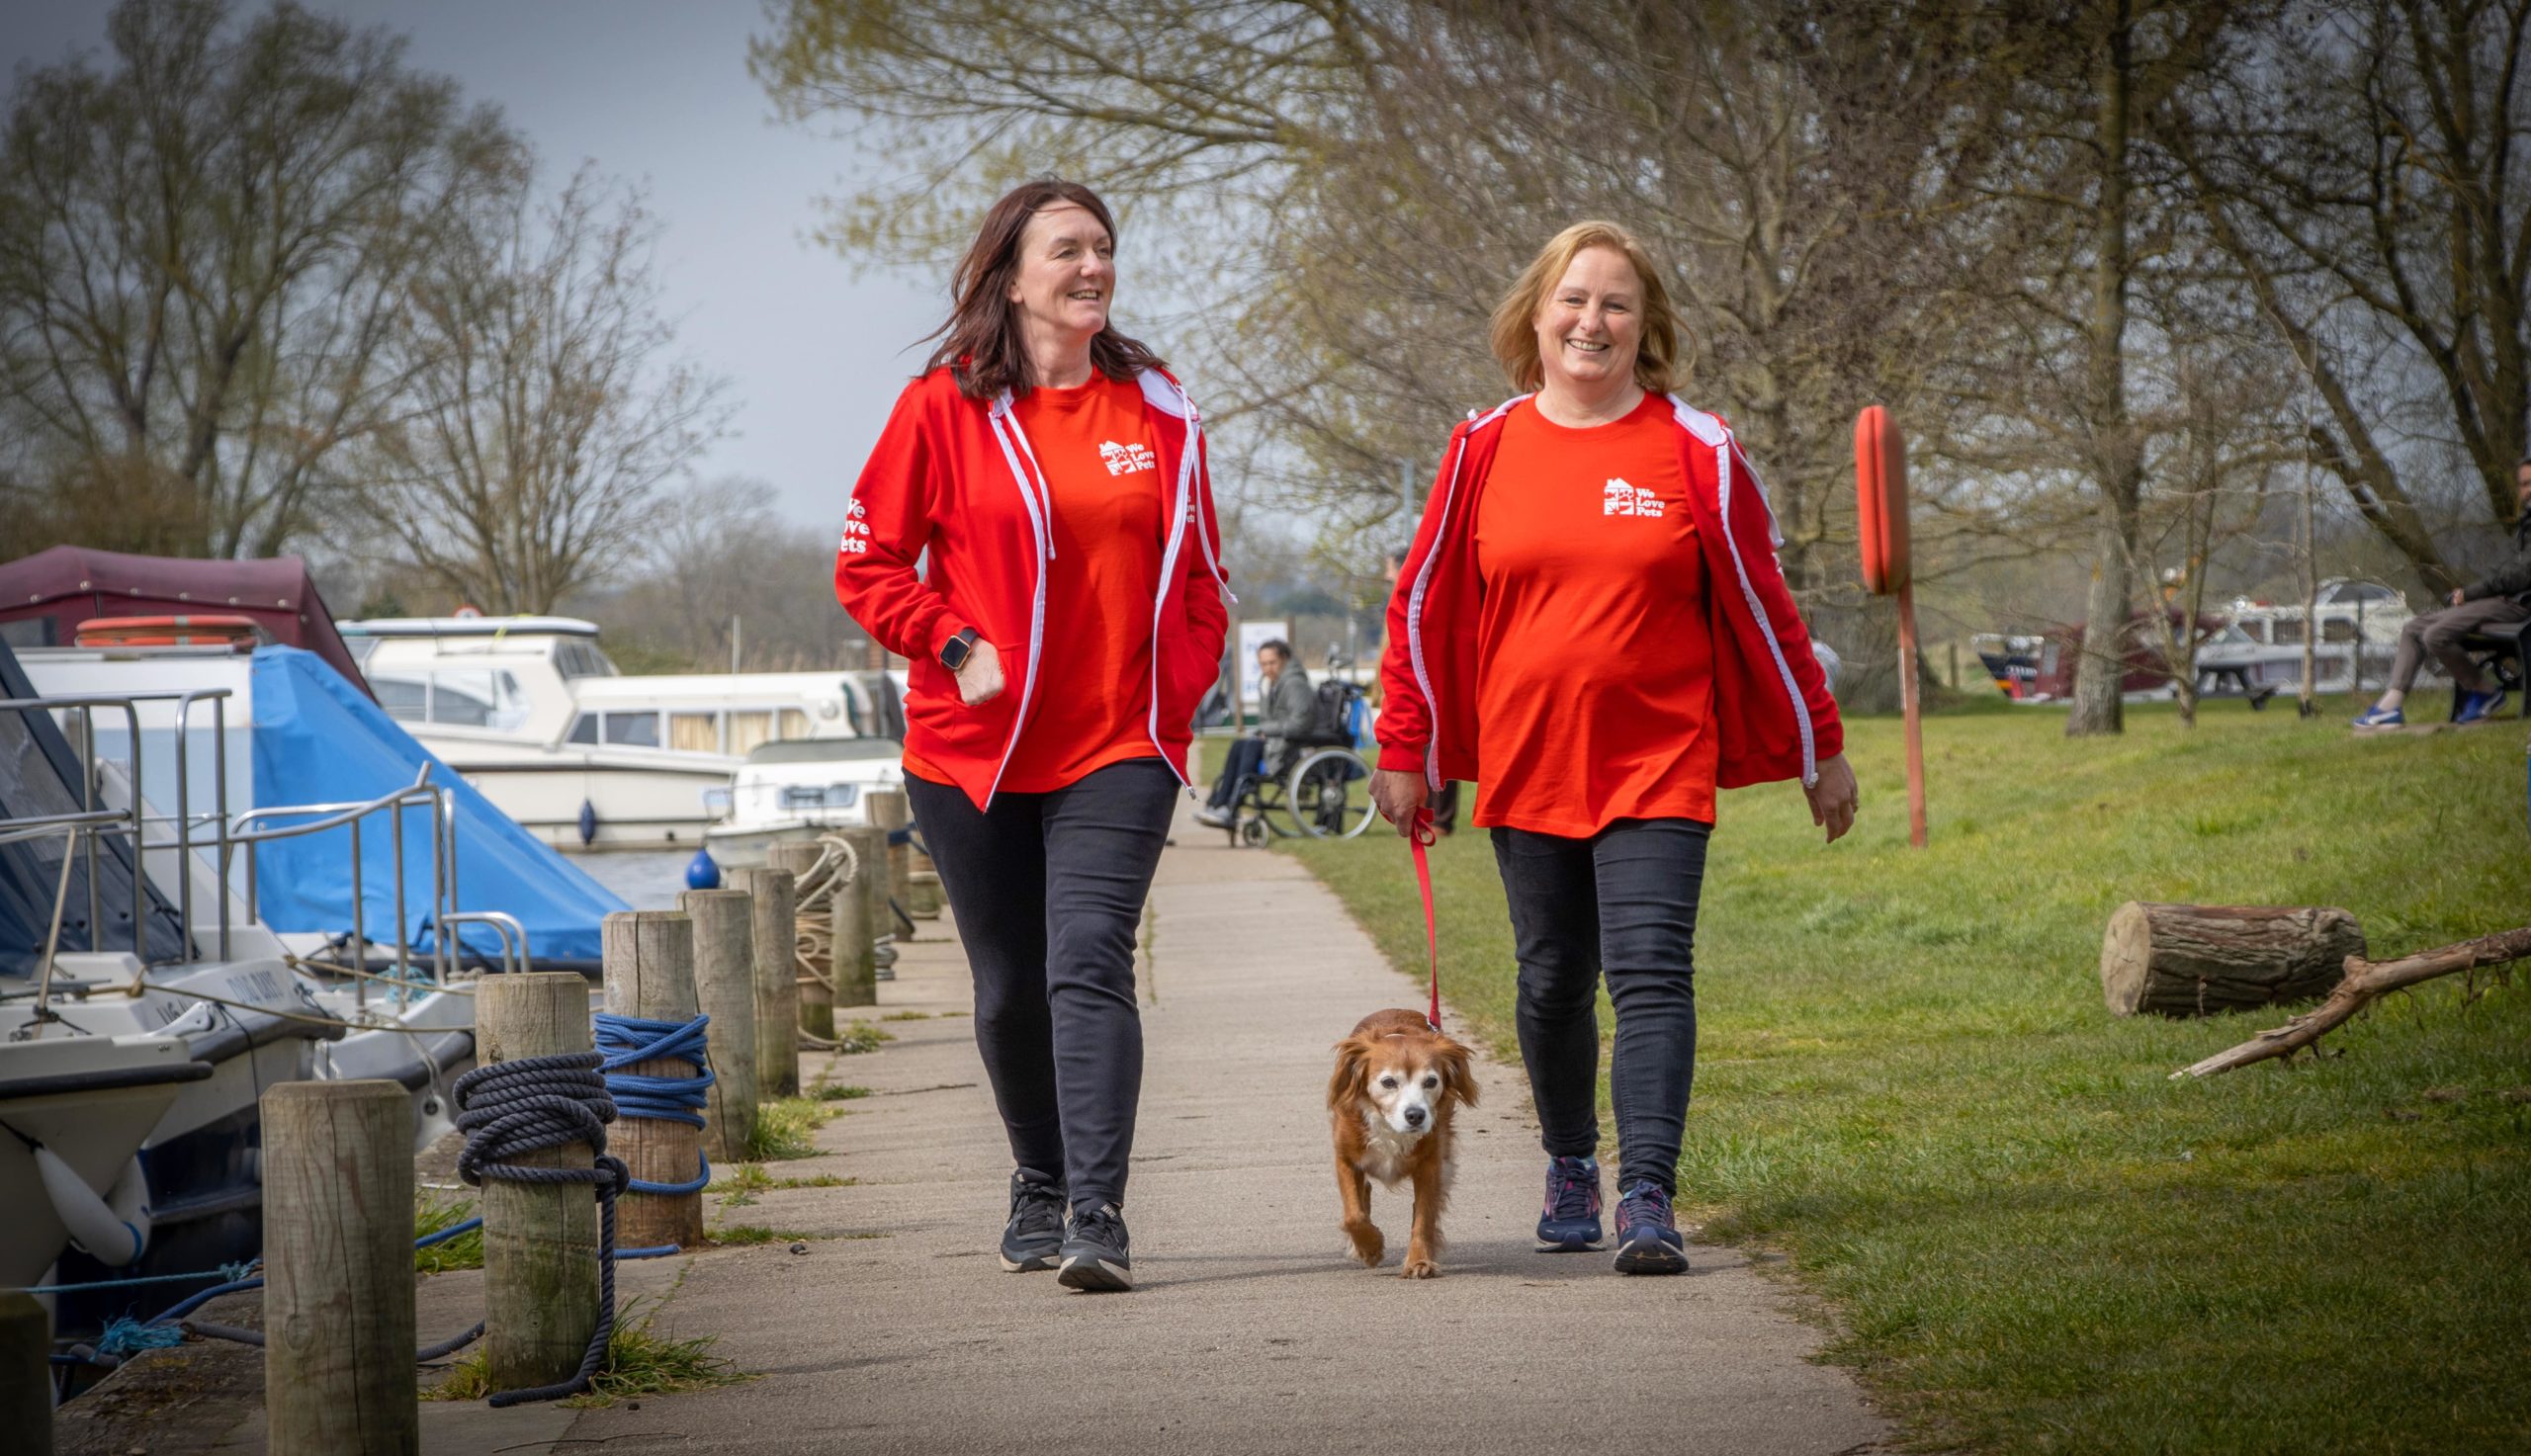 Ruth and Rachael from We Love Pets Woodbridge and Ipswich walking dog on lead